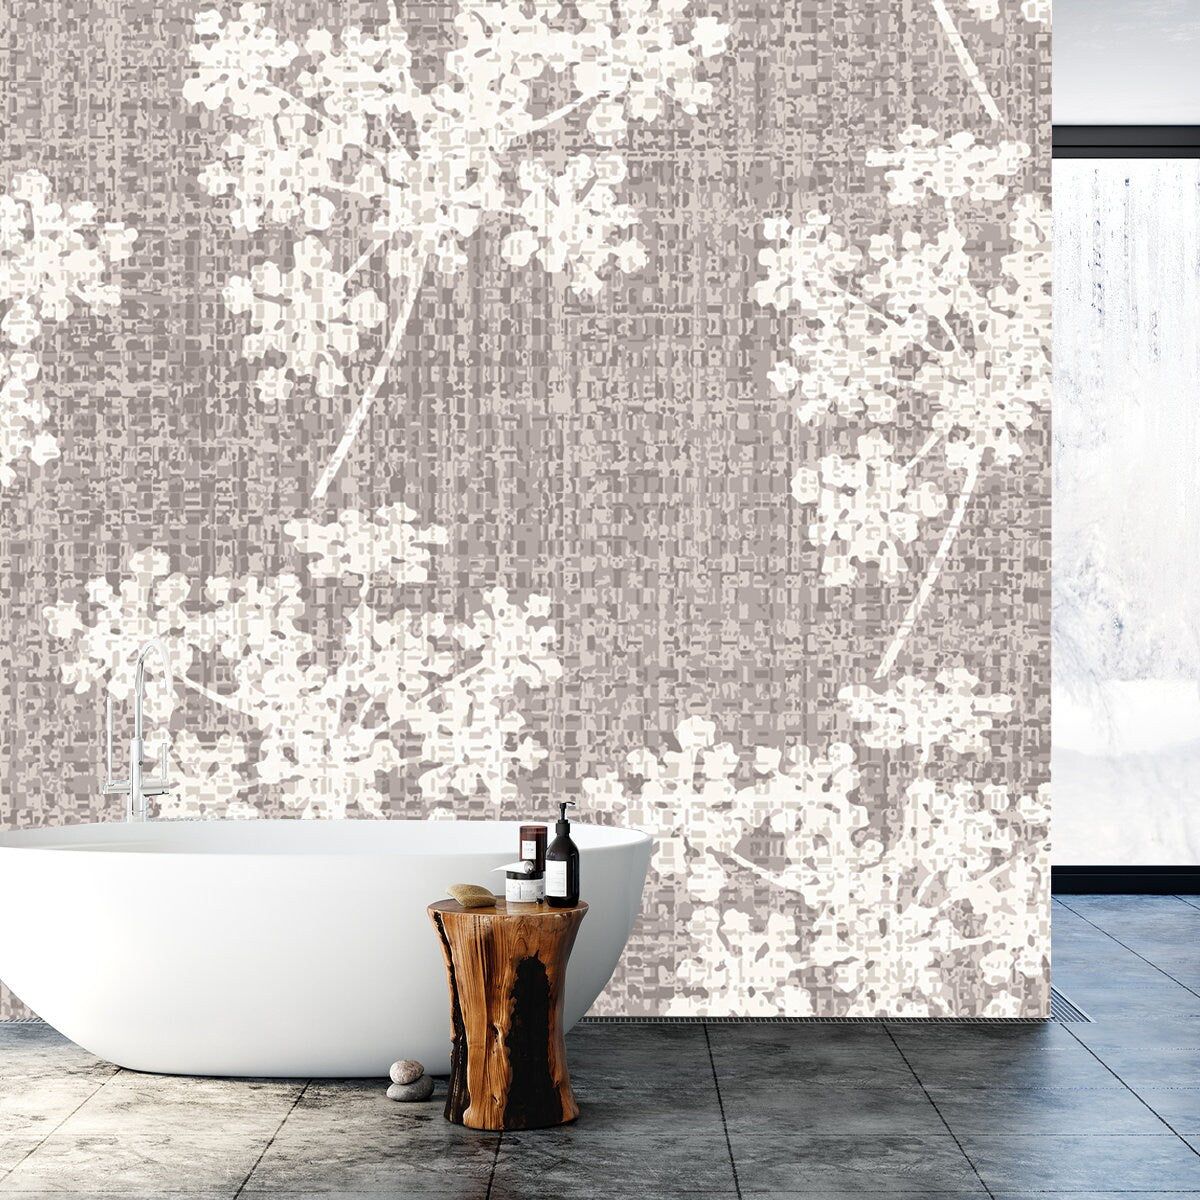 Neutral Floral Seamless Vector Background. Simple Whimsical Romantic 2 Tone Pattern Wallpaper Bathroom Mural